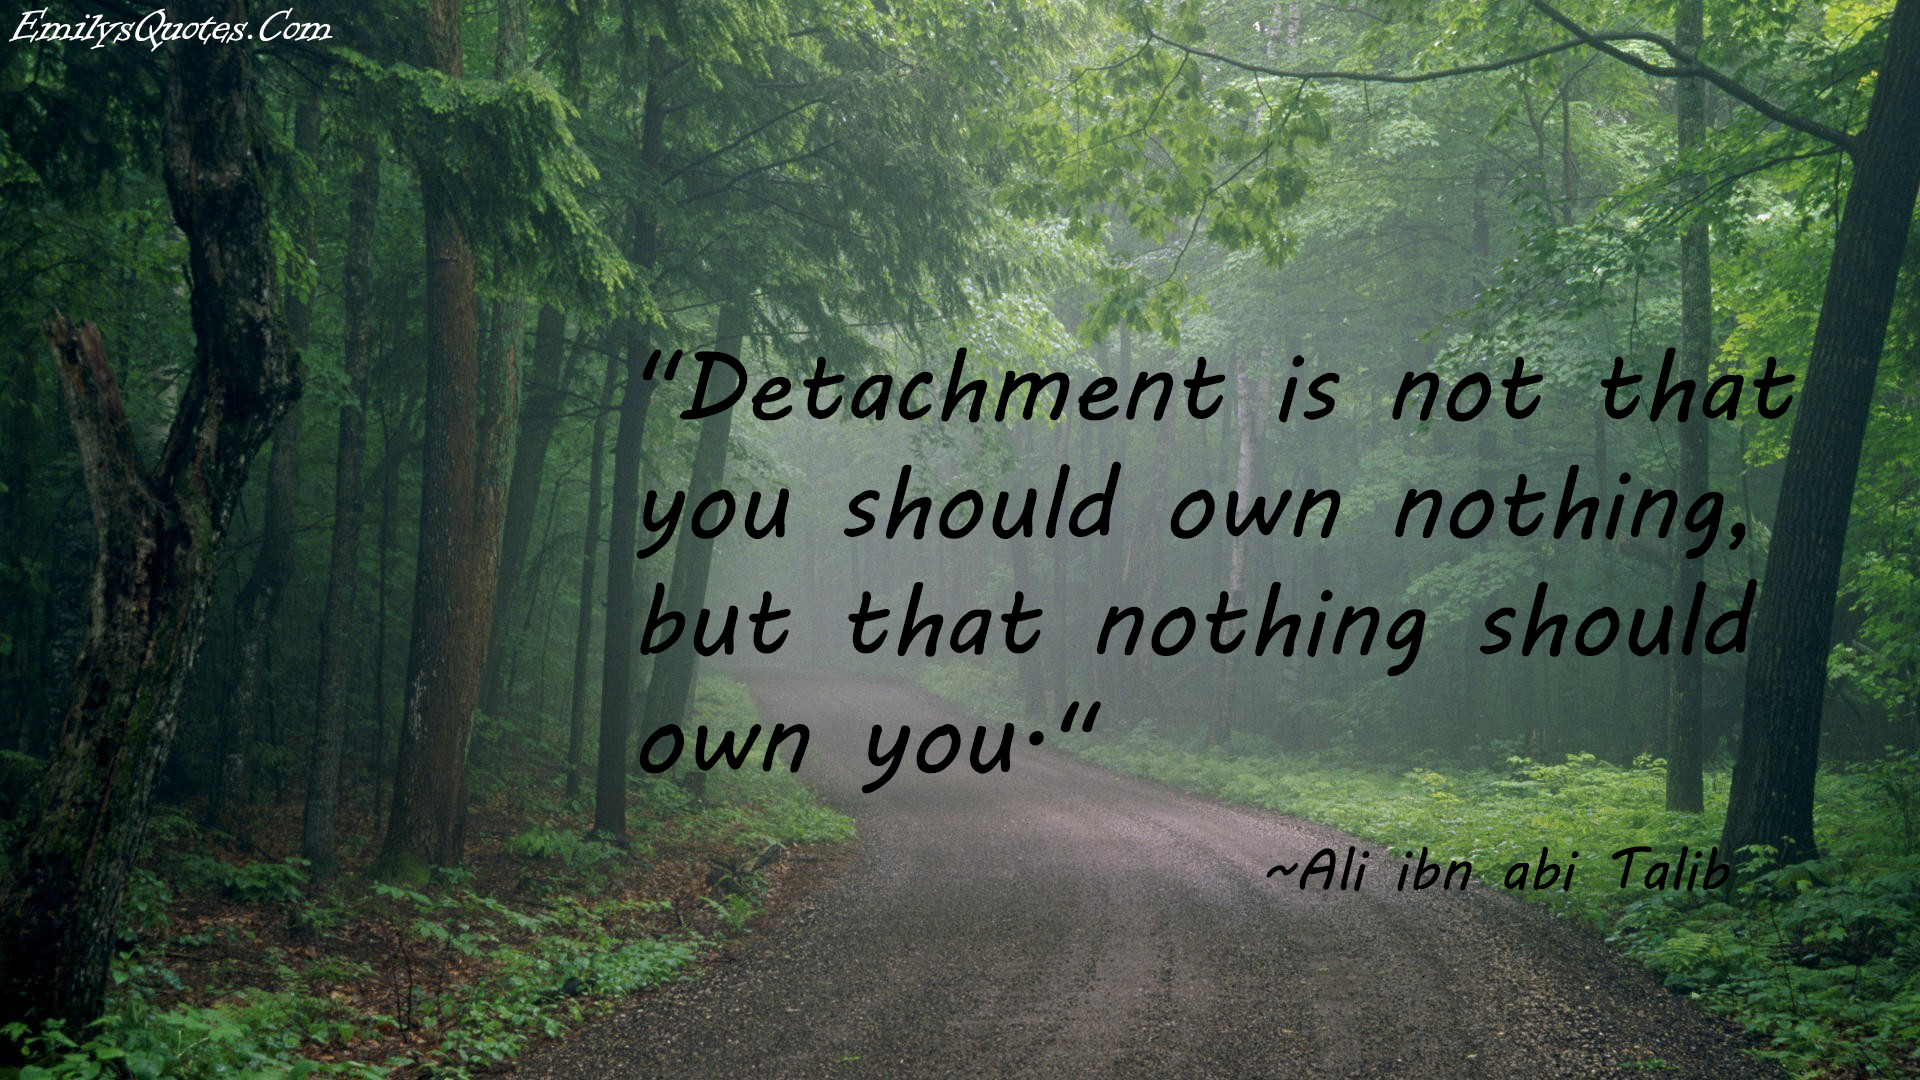 Detachment is not that you should own nothing, but that nothing should own you